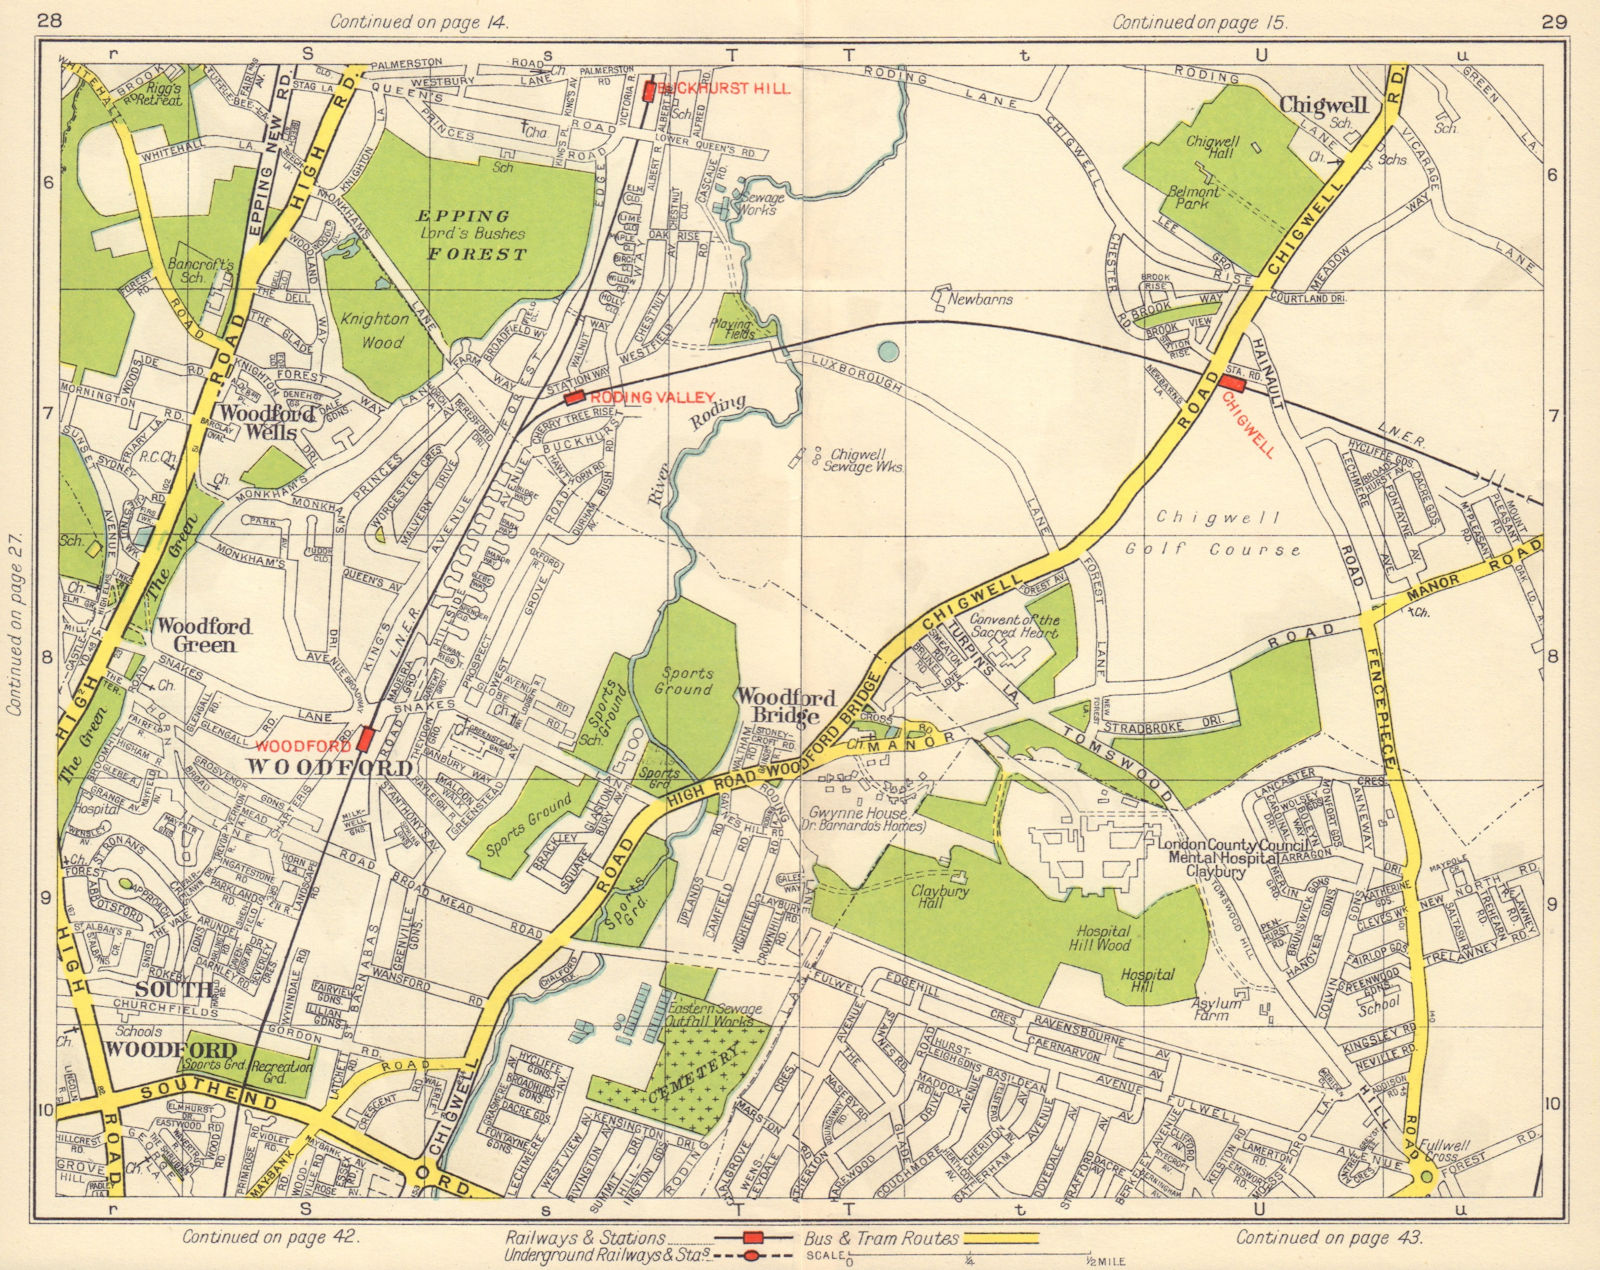 NE LONDON. South Woodford Green Chigwell Grange Hill Roding Valley 1948 map